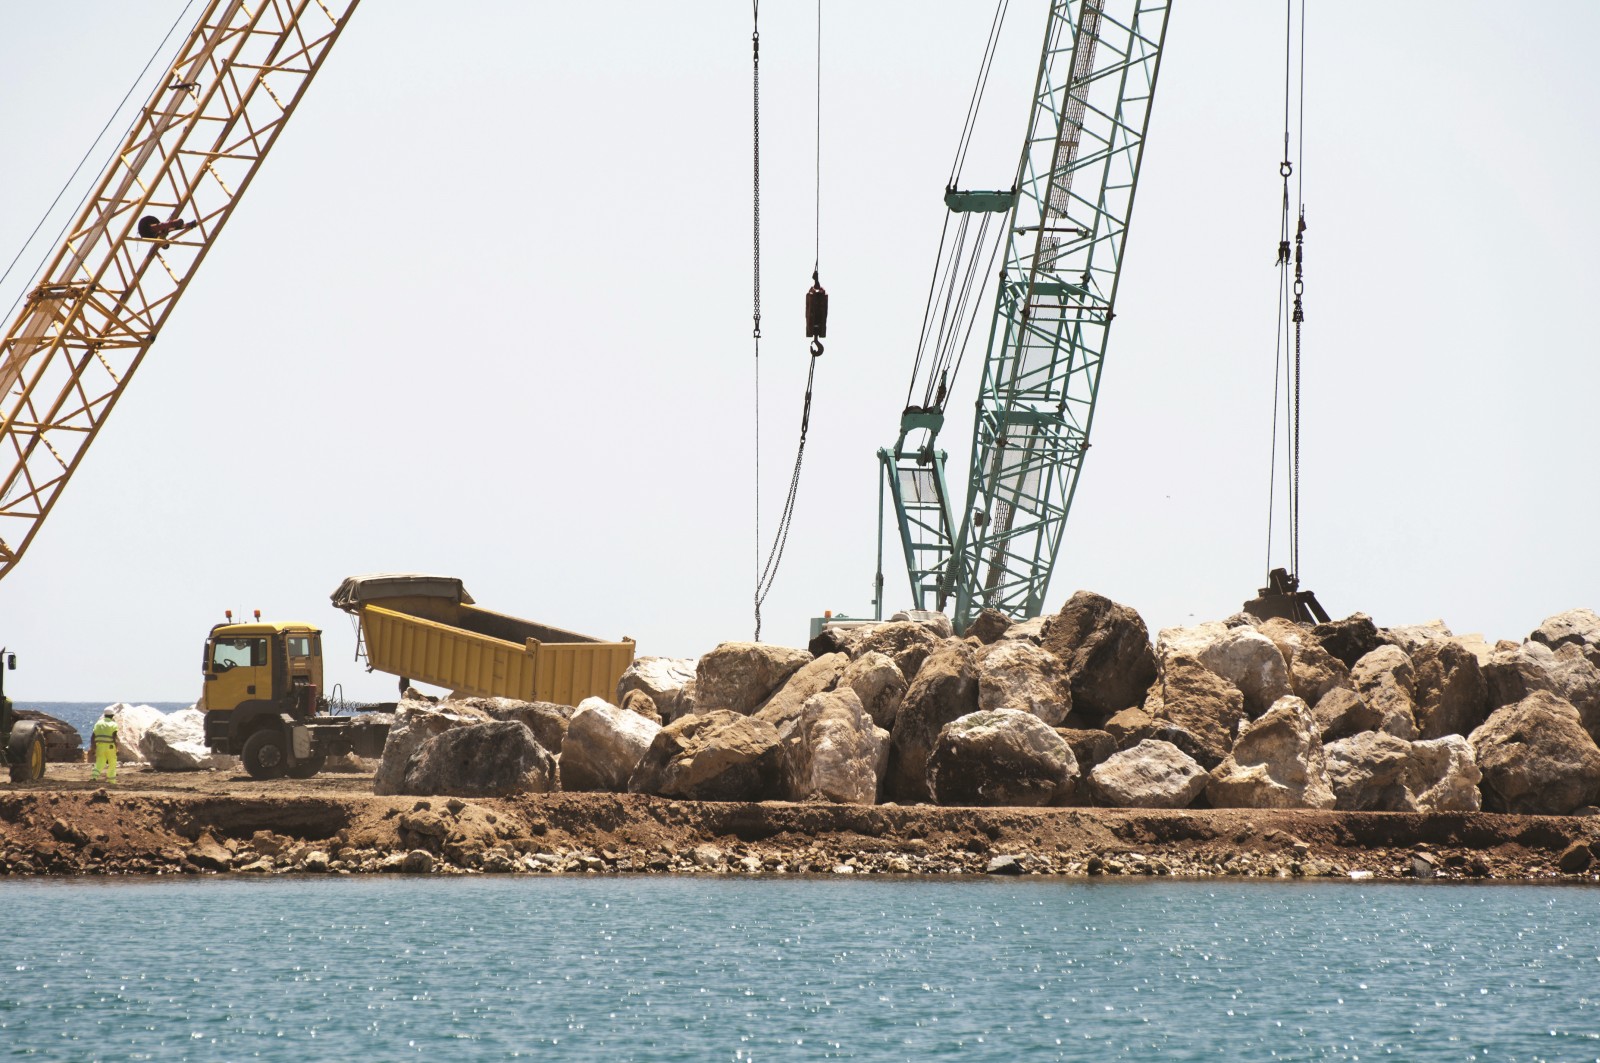 The picture shows a large construction project by the sea. Large blocks of stone are being moved by large cranes and a large truck. 